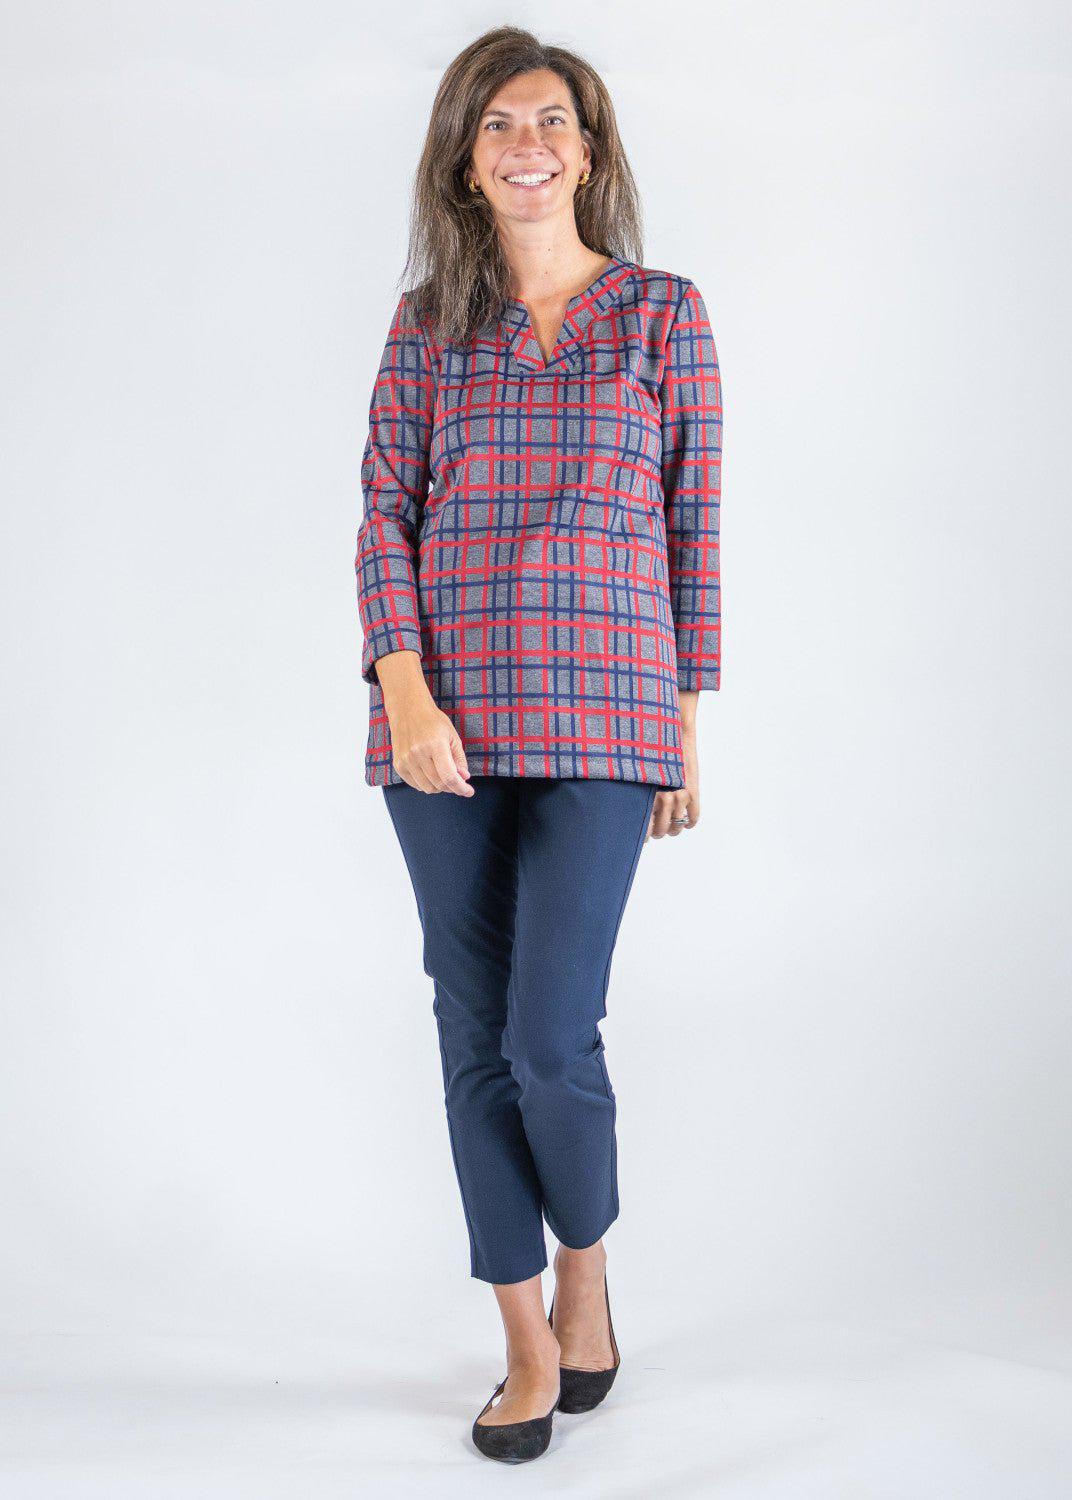 lucille-top-2-plaid-grey-navy-red-220753.jpg